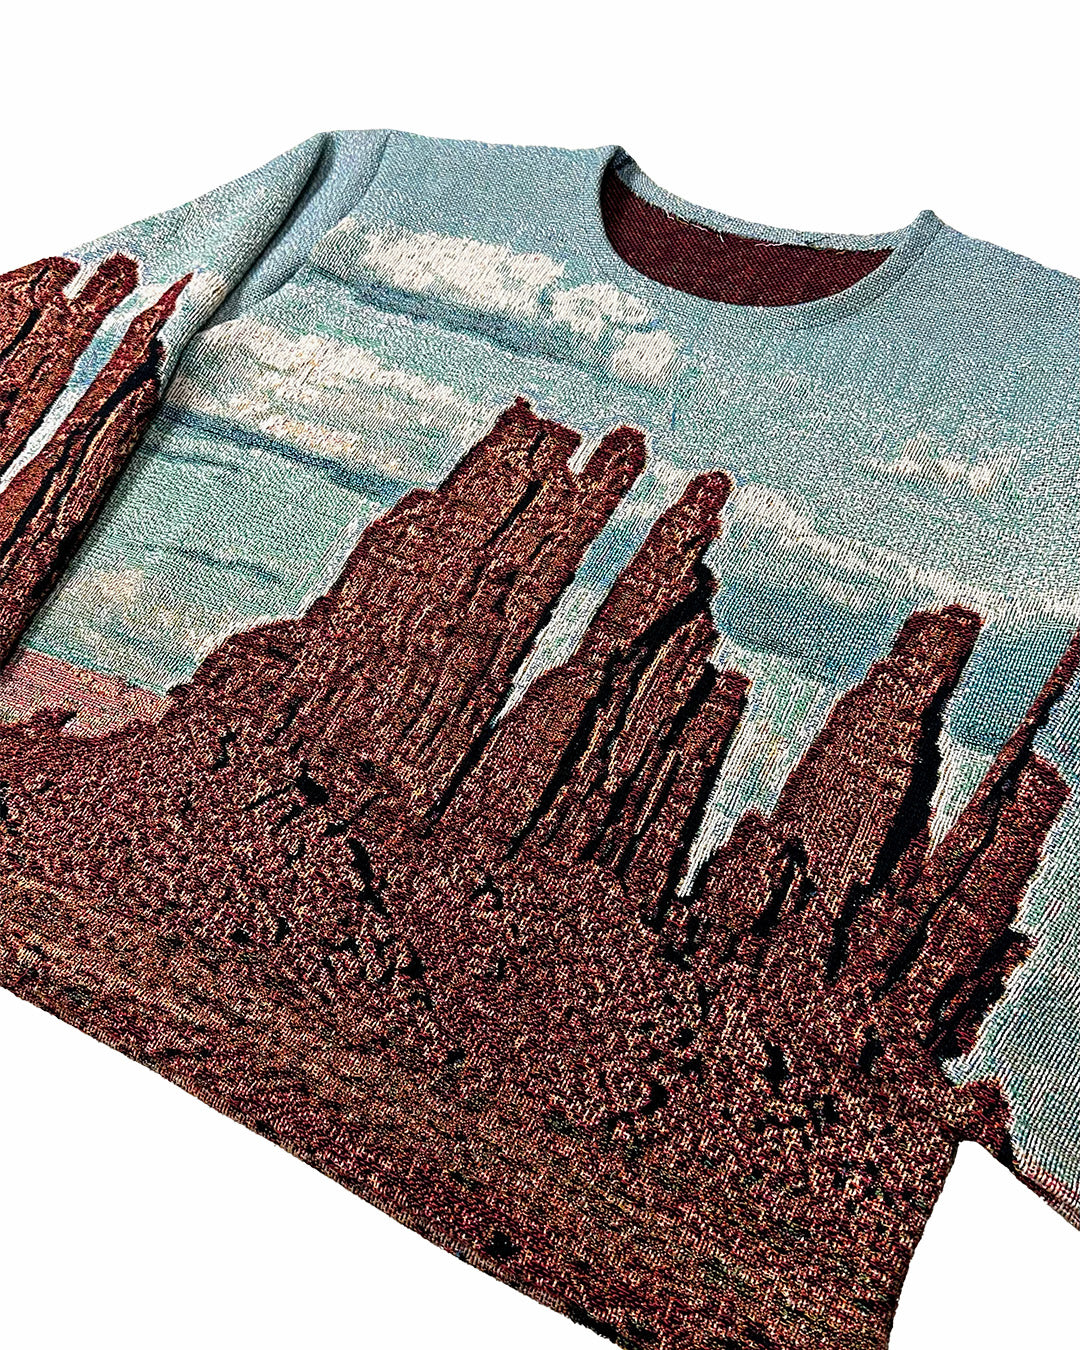 MONUMENT VALLEY TAPESTRY CREWNECK